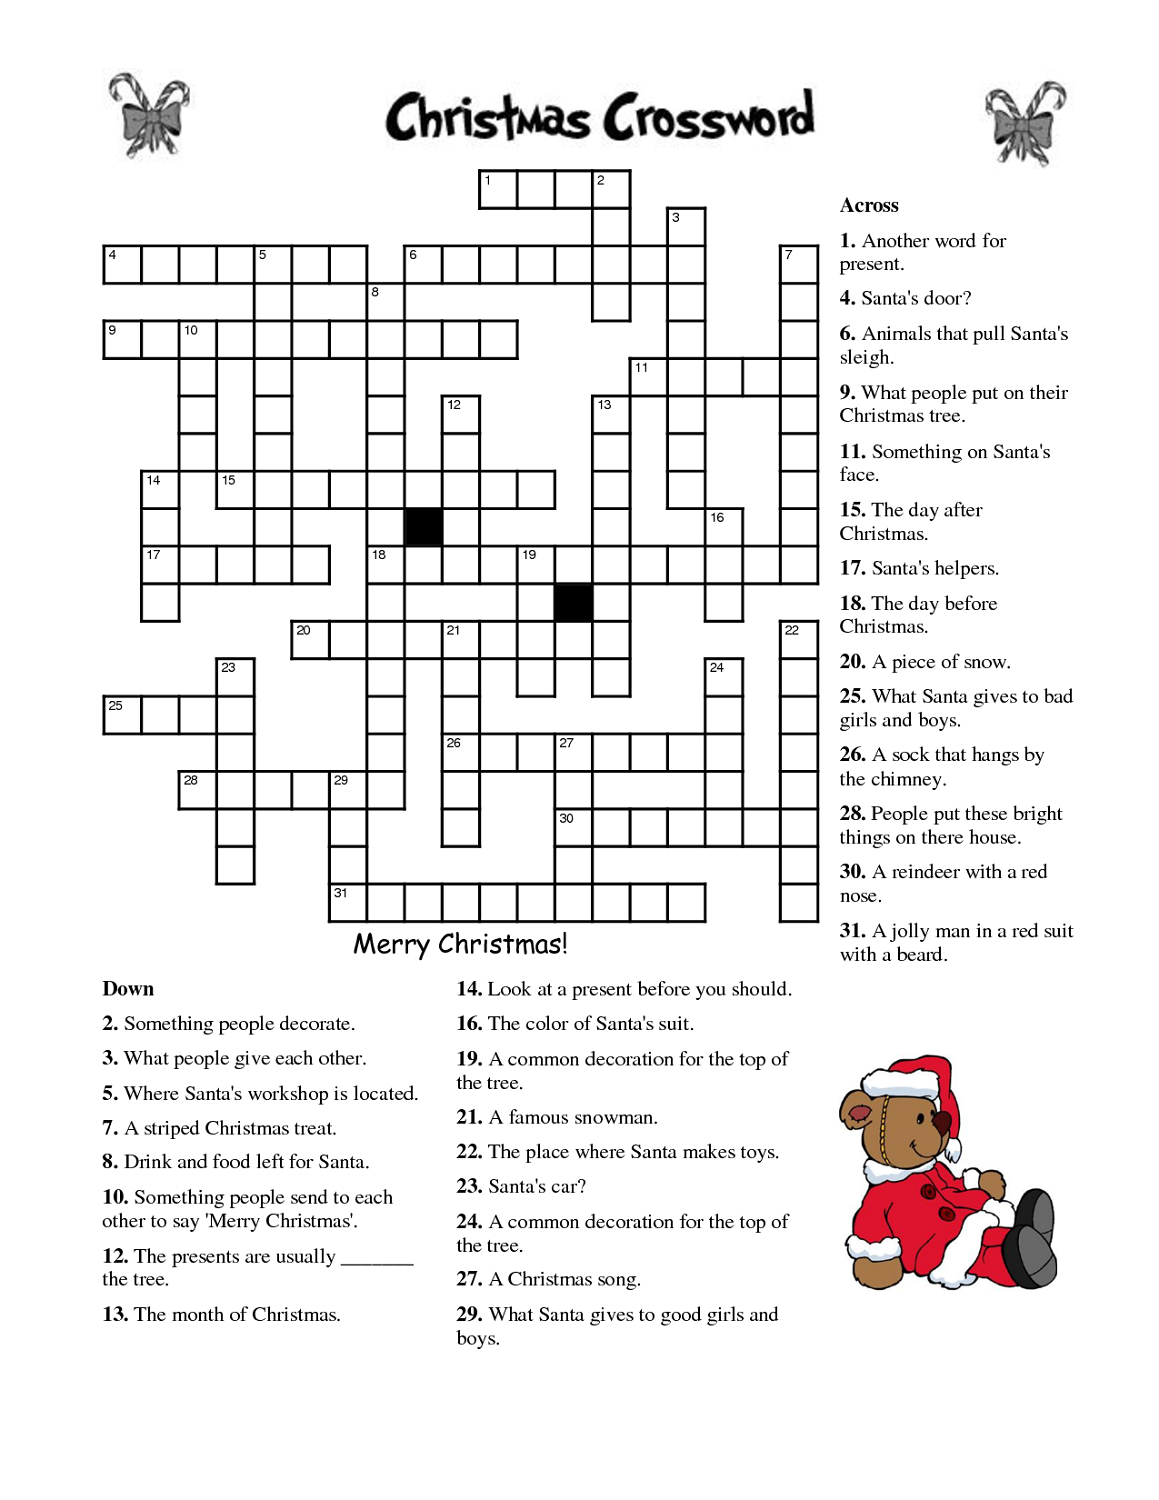 Printable Christmas Crossword Puzzles For Adults With Answers 